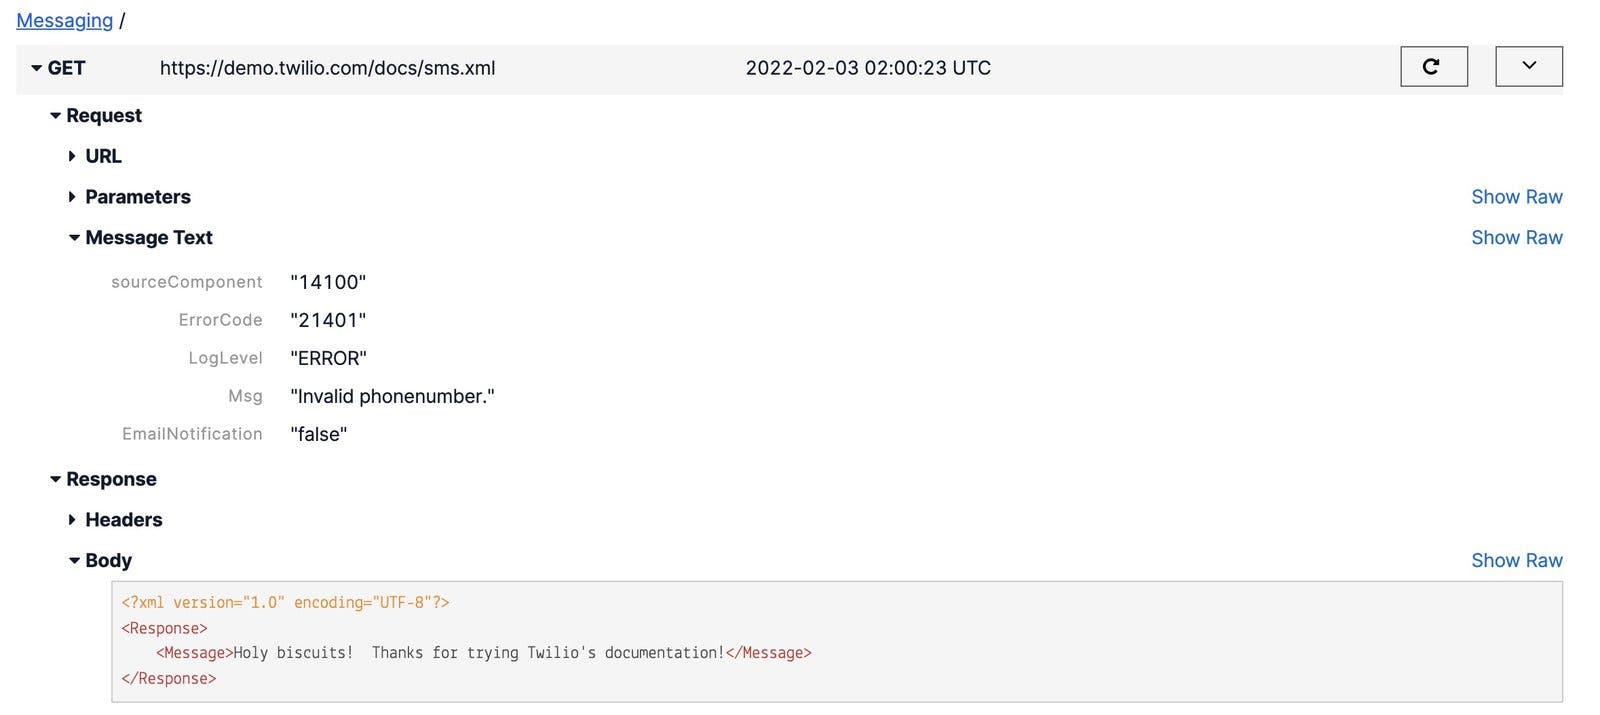 A detailed view of the messaging request inspector. We see the type of request (GET).